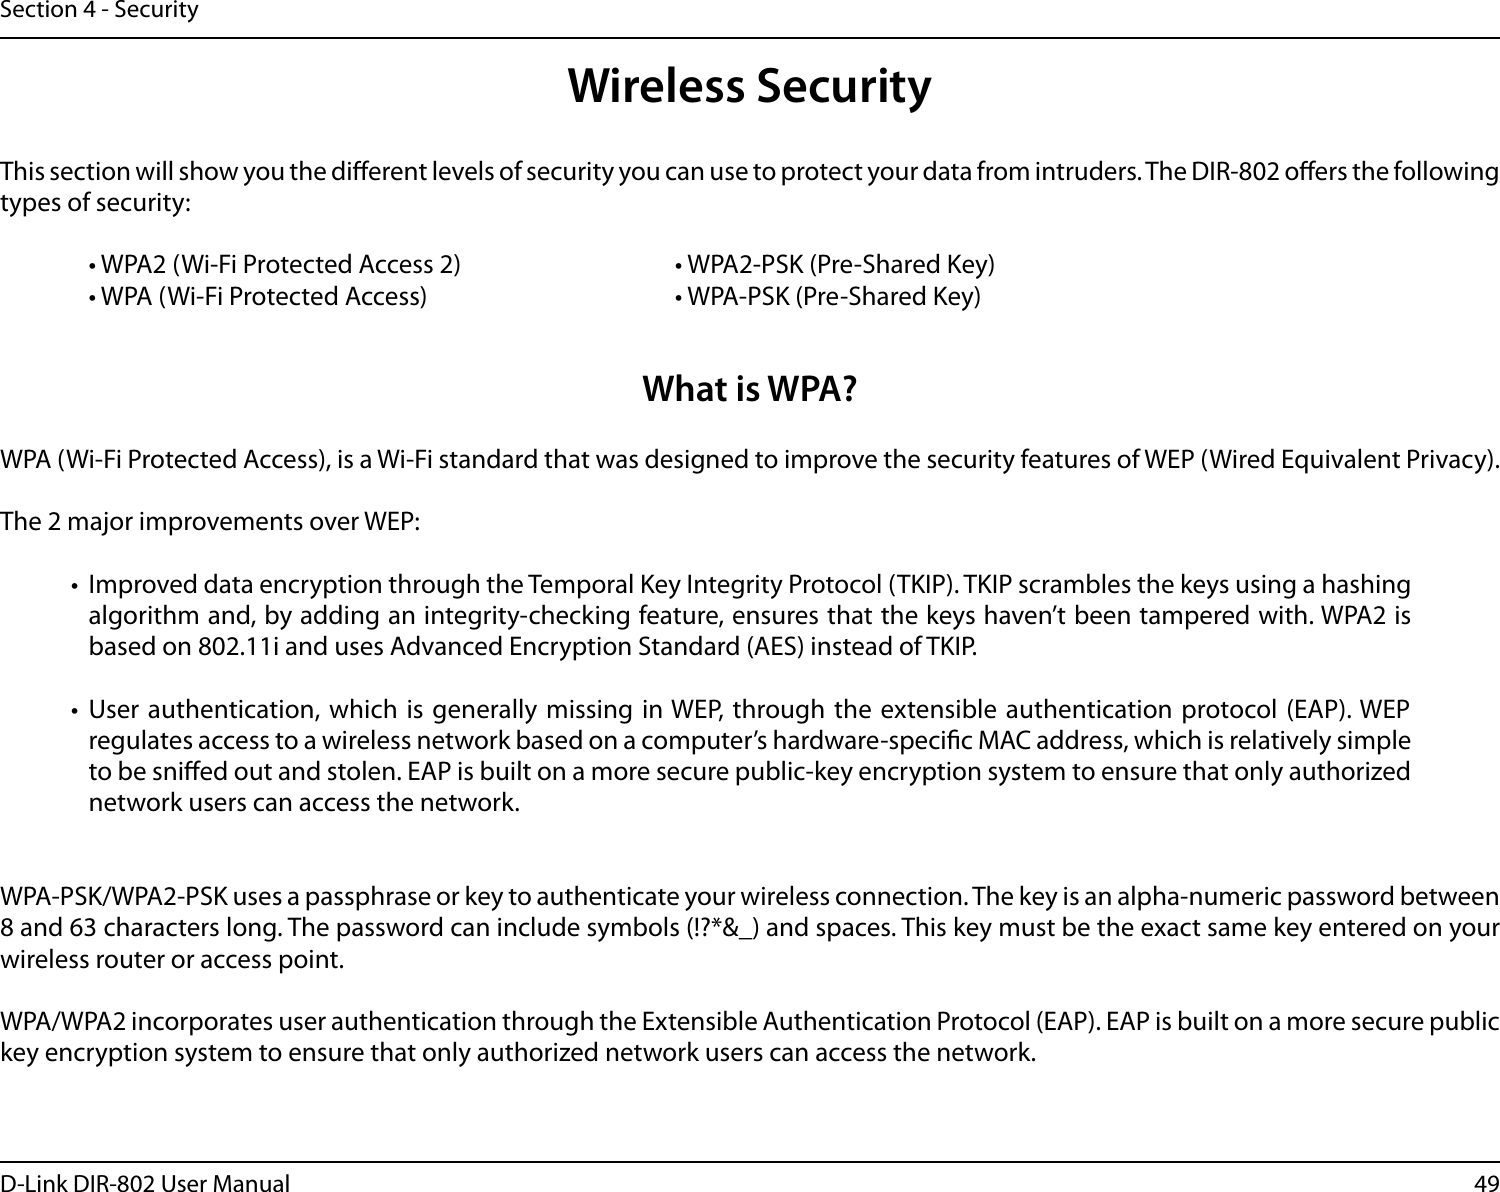 49D-Link DIR-802 User ManualSection 4 - SecurityWireless SecurityThis section will show you the dierent levels of security you can use to protect your data from intruders. The DIR-802 oers the following types of security:  • WPA2 (Wi-Fi Protected Access 2)       • WPA2-PSK (Pre-Shared Key)  • WPA (Wi-Fi Protected Access)        • WPA-PSK (Pre-Shared Key)What is WPA?WPA (Wi-Fi Protected Access), is a Wi-Fi standard that was designed to improve the security features of WEP (Wired Equivalent Privacy).  The 2 major improvements over WEP: •  Improved data encryption through the Temporal Key Integrity Protocol (TKIP). TKIP scrambles the keys using a hashing algorithm and, by adding an integrity-checking feature, ensures that the keys haven’t been tampered with. WPA2 is based on 802.11i and uses Advanced Encryption Standard (AES) instead of TKIP.•  User authentication, which is generally missing in WEP, through the extensible authentication protocol (EAP). WEP regulates access to a wireless network based on a computer’s hardware-specic MAC address, which is relatively simple to be snied out and stolen. EAP is built on a more secure public-key encryption system to ensure that only authorized network users can access the network.WPA-PSK/WPA2-PSK uses a passphrase or key to authenticate your wireless connection. The key is an alpha-numeric password between 8 and 63 characters long. The password can include symbols (!?*&amp;_) and spaces. This key must be the exact same key entered on your wireless router or access point.WPA/WPA2 incorporates user authentication through the Extensible Authentication Protocol (EAP). EAP is built on a more secure public key encryption system to ensure that only authorized network users can access the network.